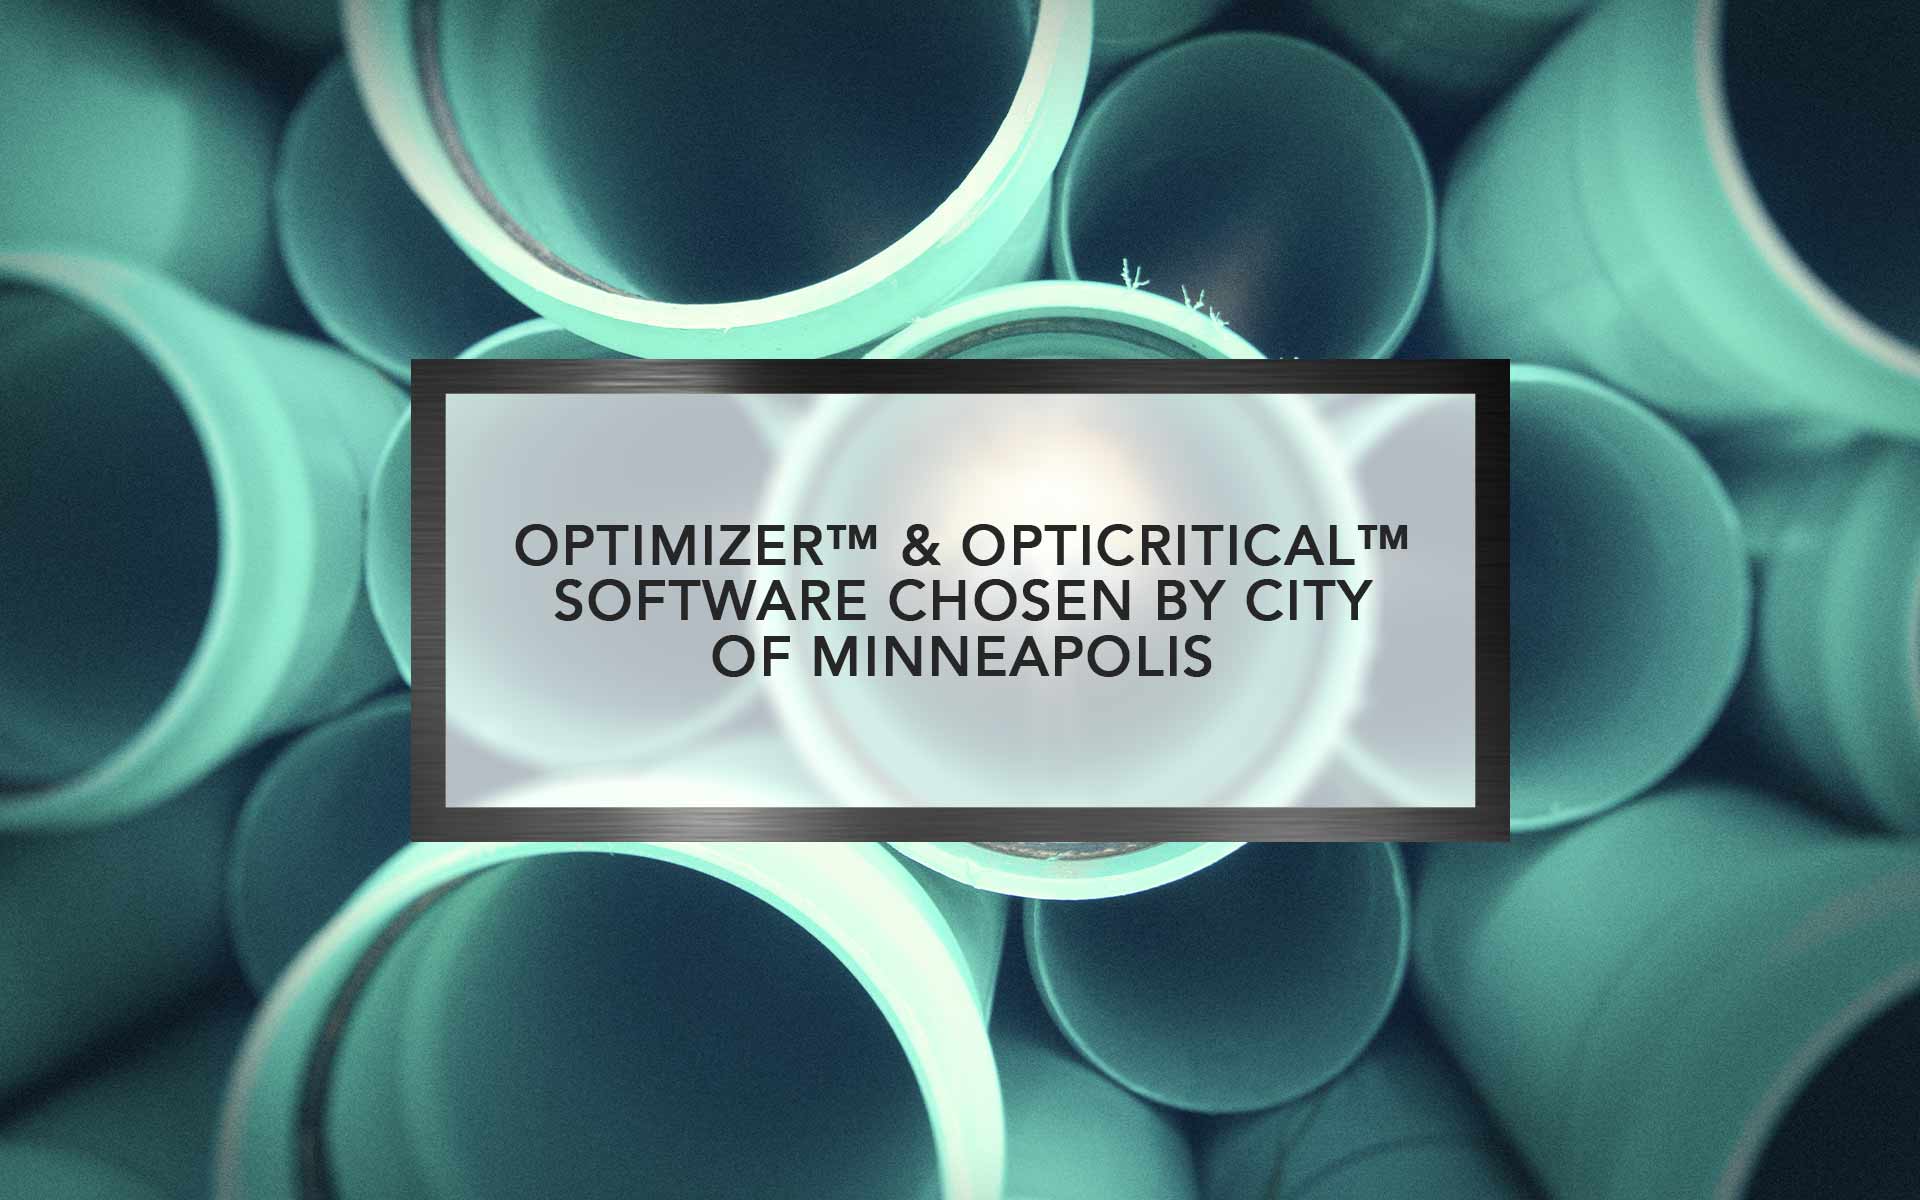 Optimizer™ software chosen by City of Minneapolis